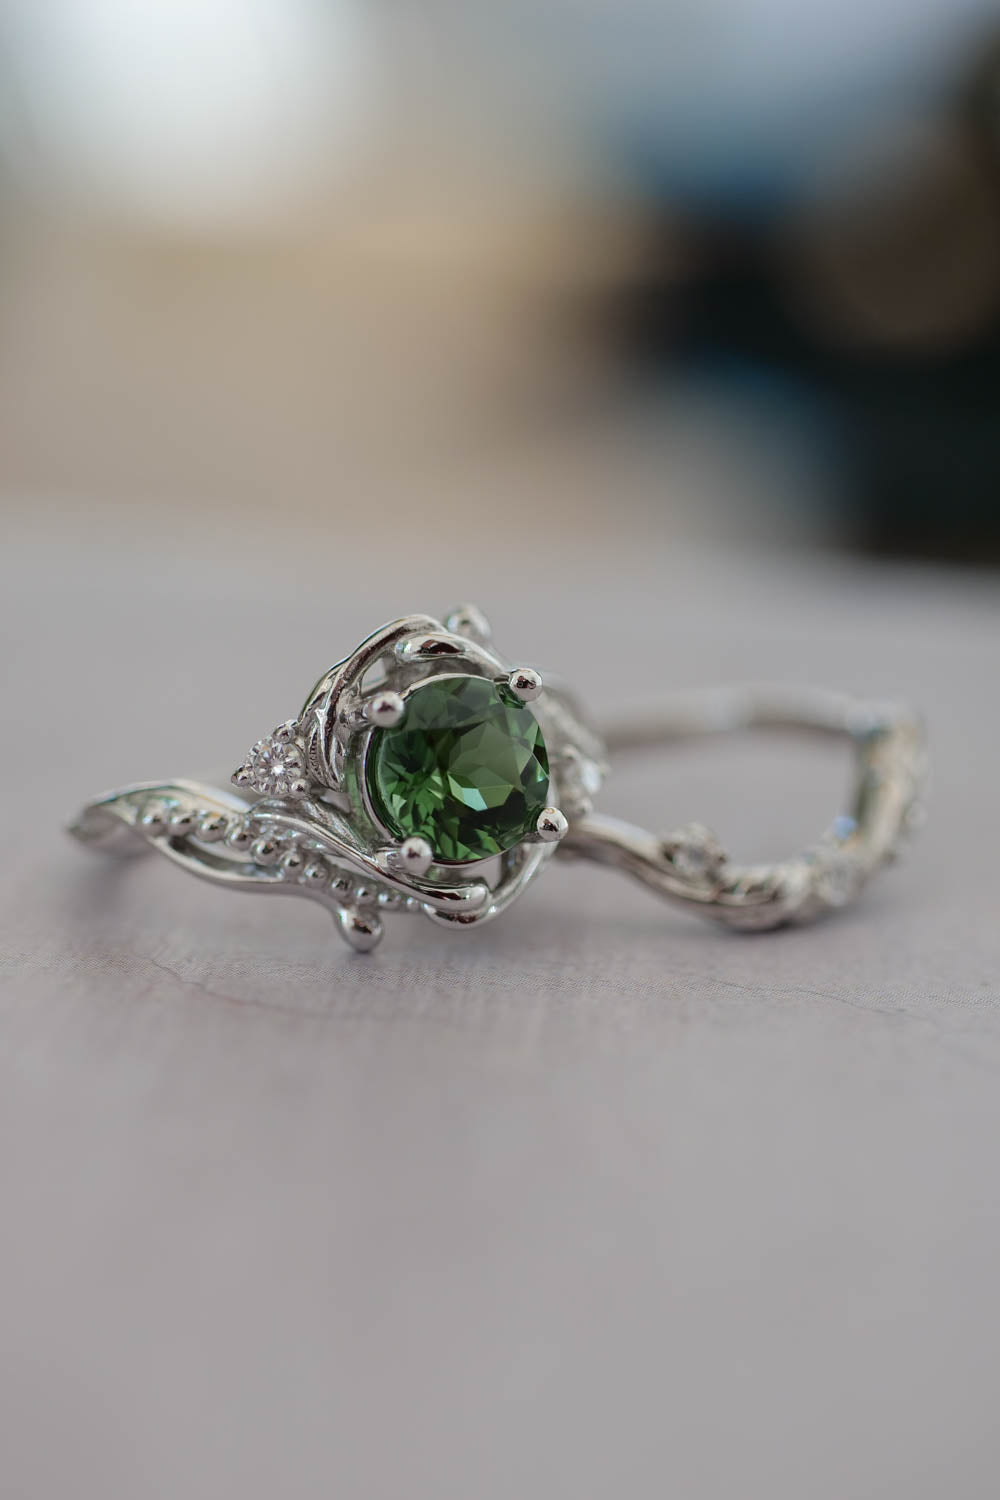 vintage green tourmaline engagement ring and wedding band